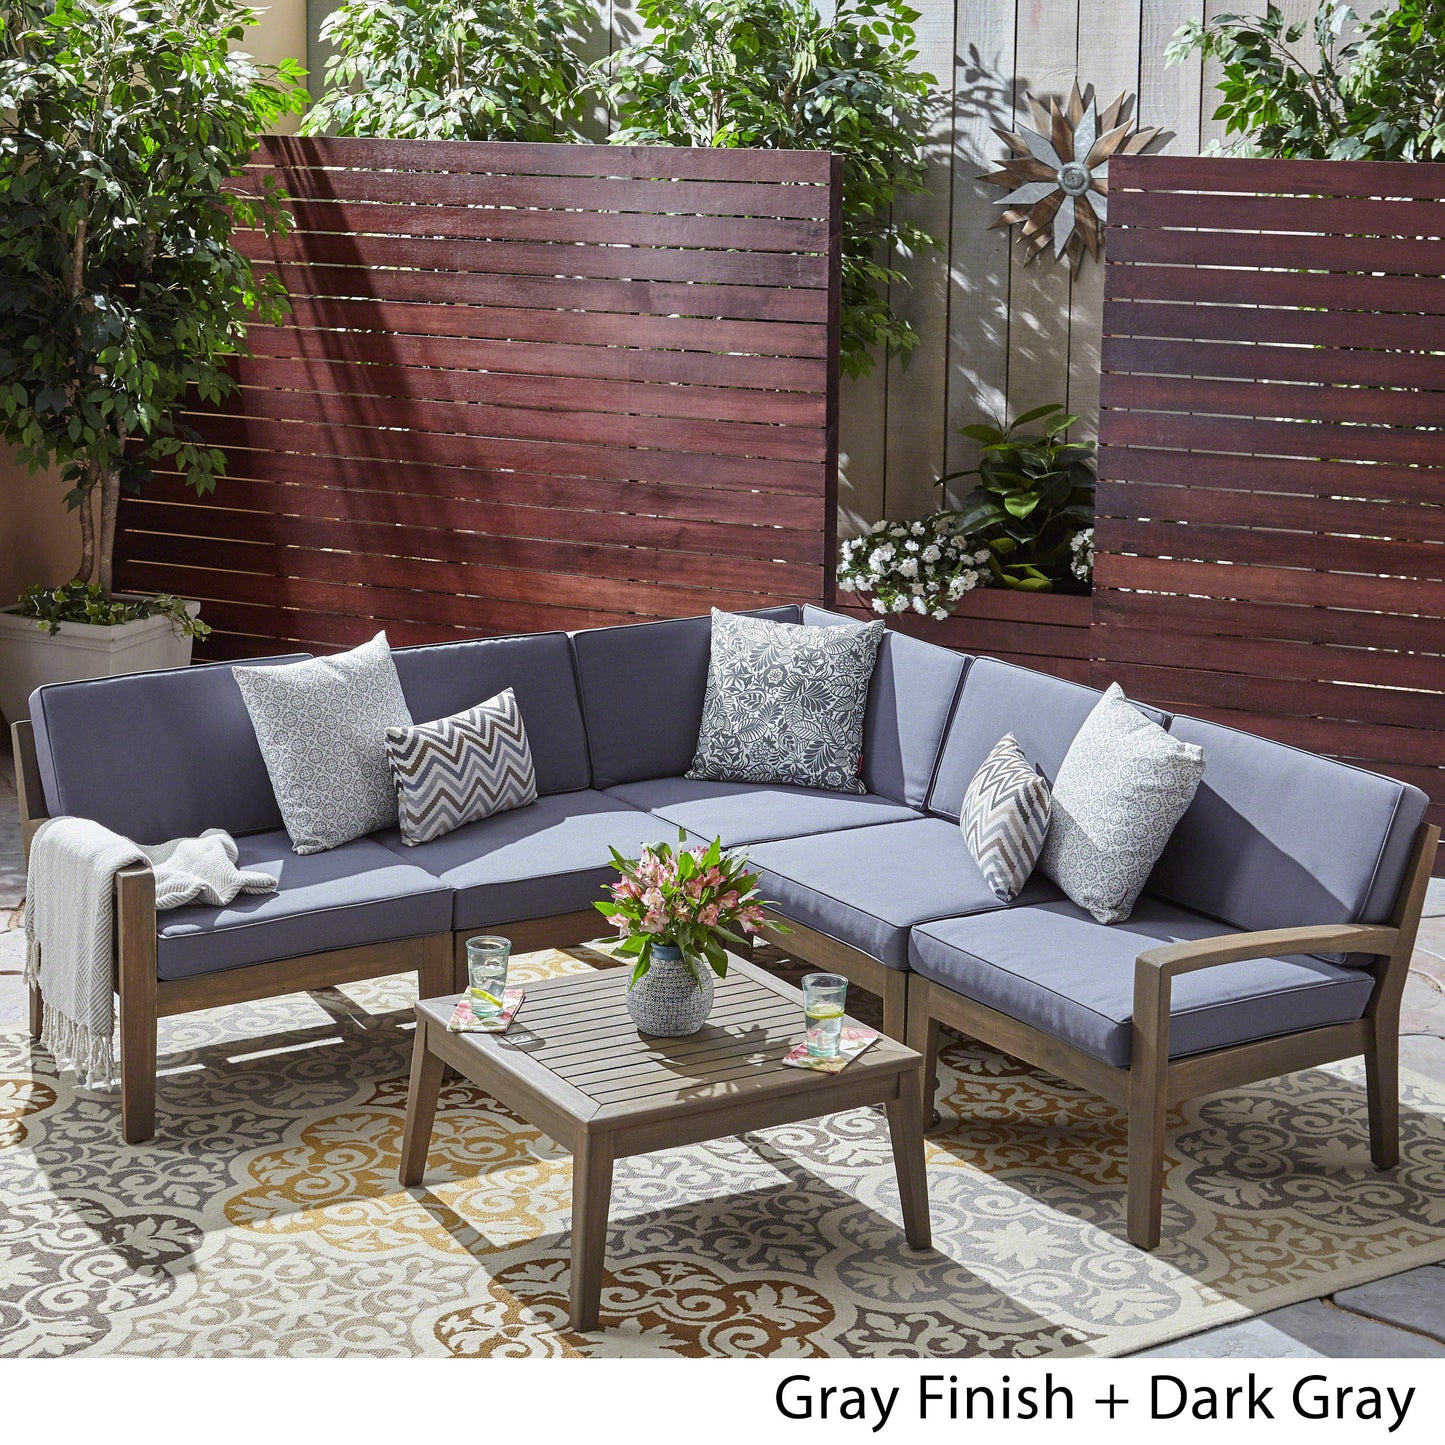 Ray Outdoor Acacia Wood 5 Seater Sectional Sofa Set with Coffee Table